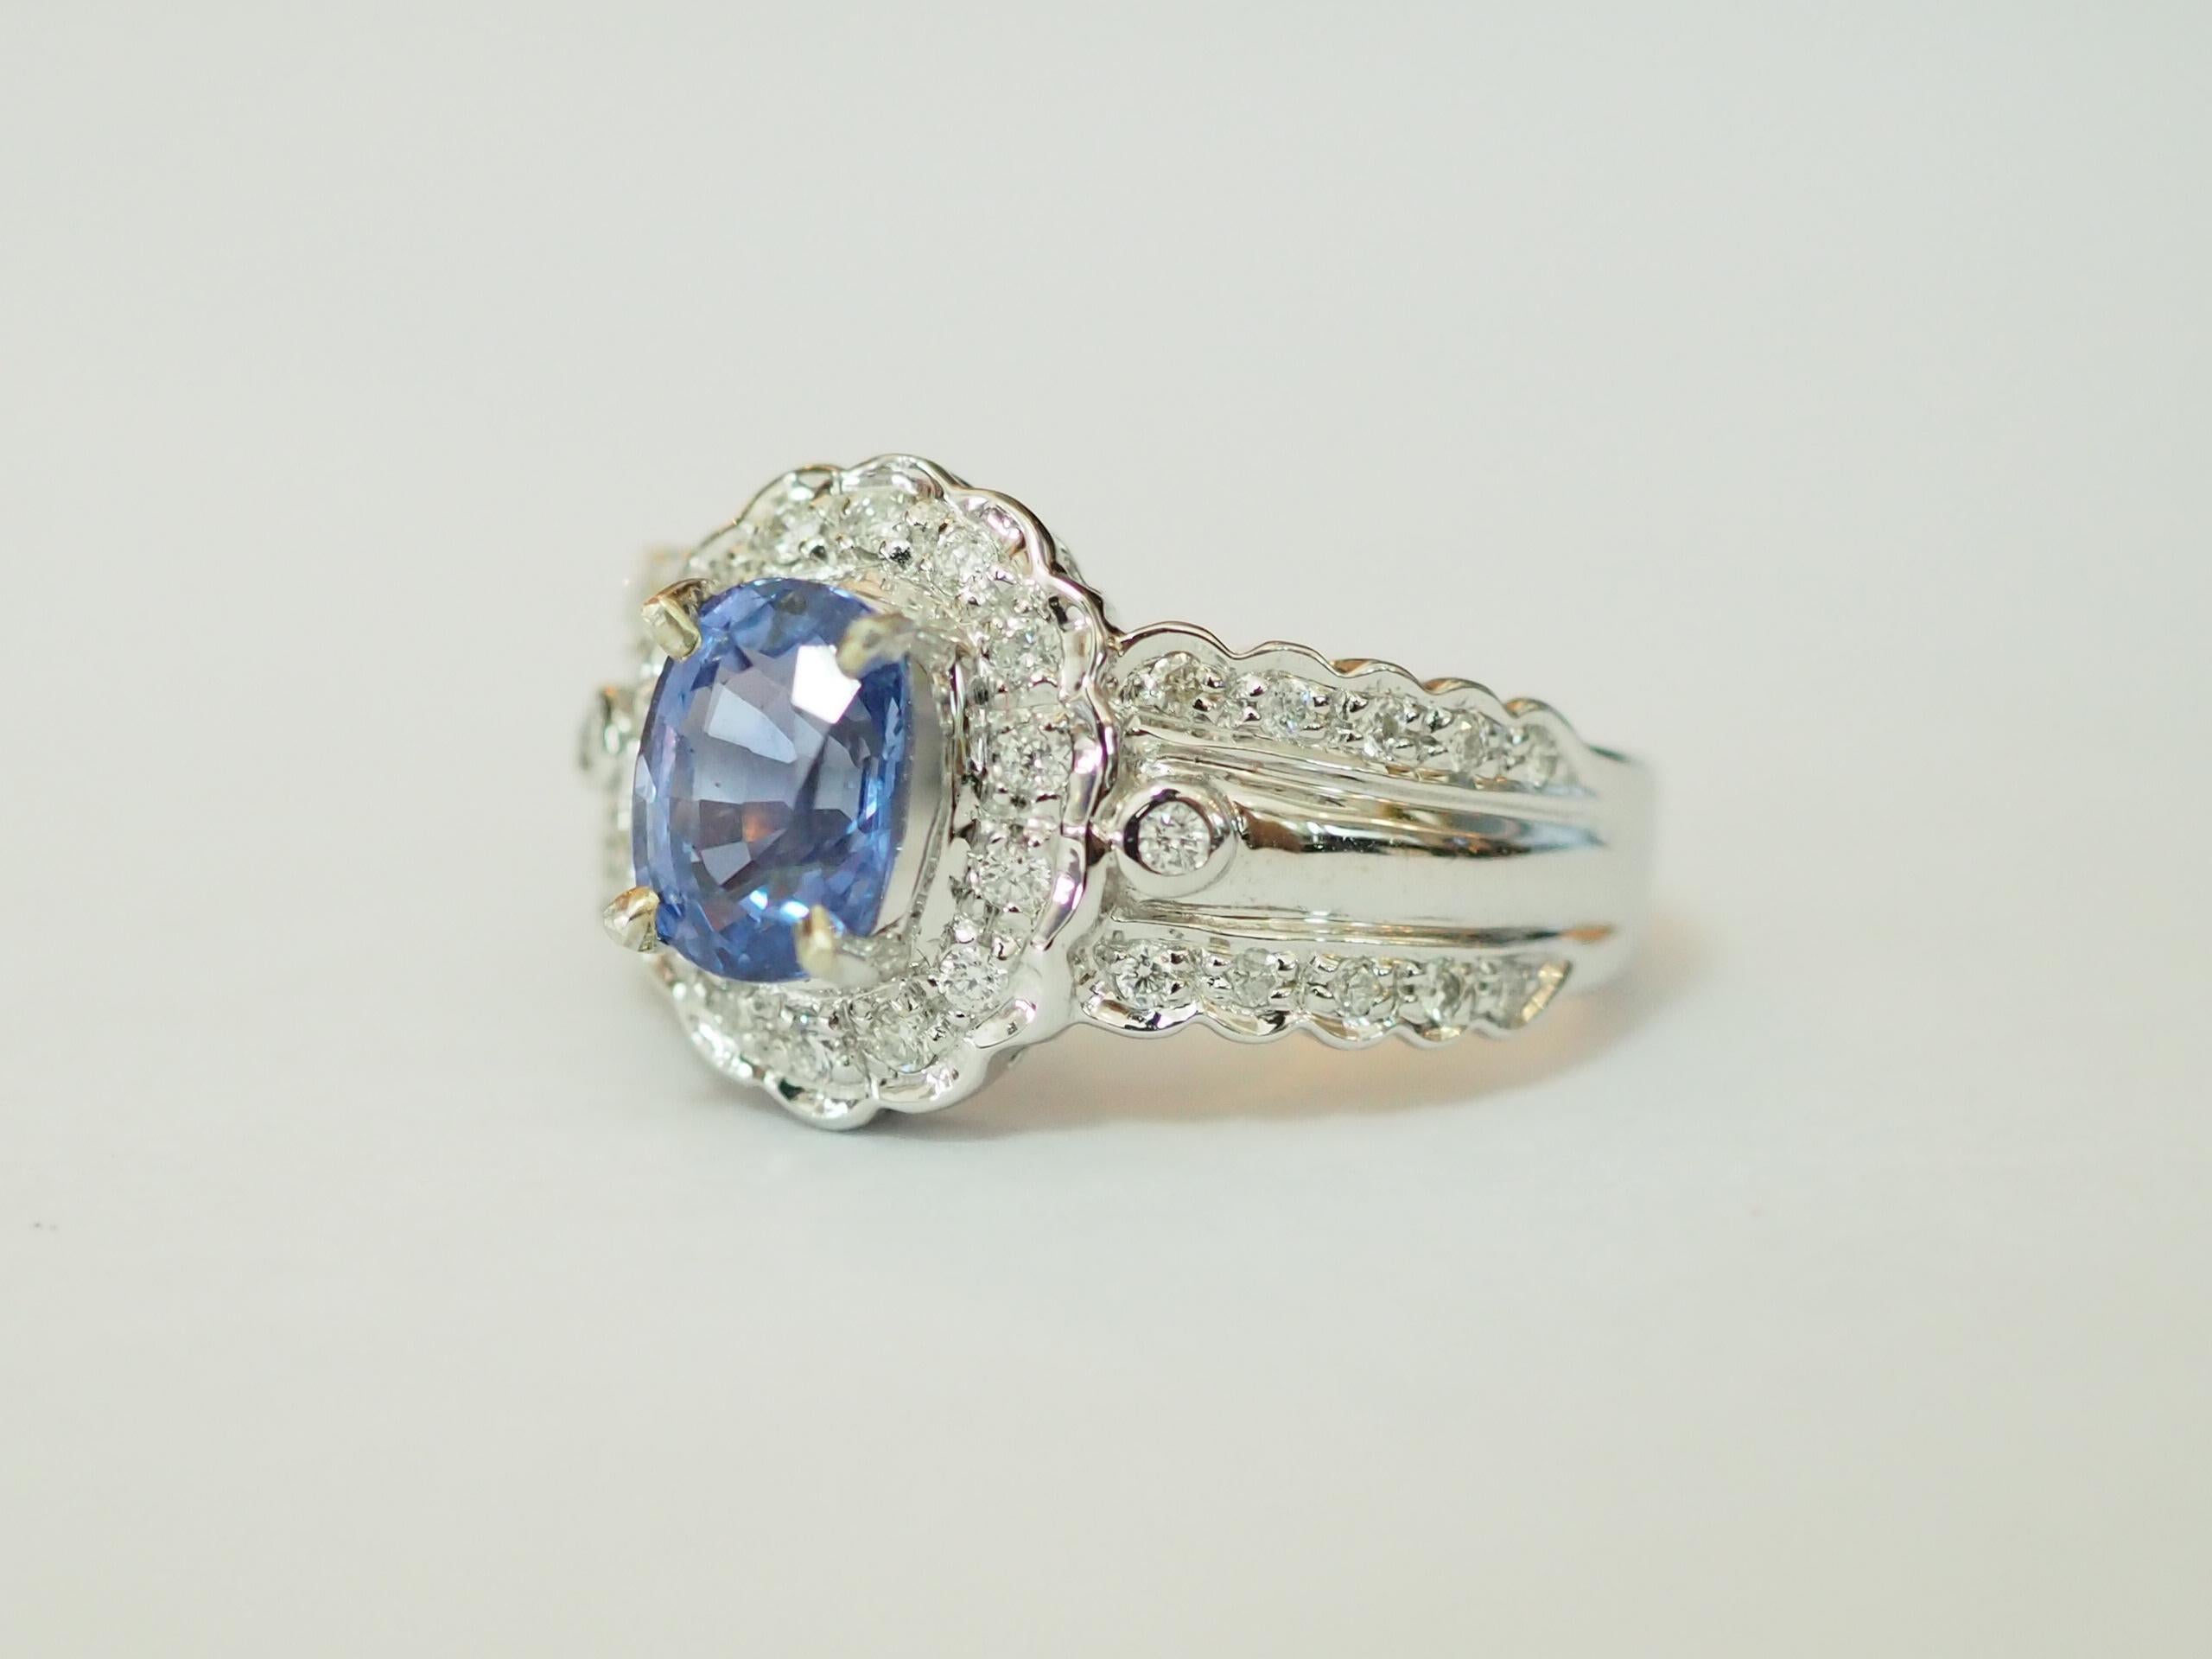 This beautiful cocktail fashion ring boasts a rare and beautiful oval cut blue sapphire from Ceylon, Sri-Lanka! The piece is accompanied by full ICA origin report #162188 on the wonderful Sri-Lankan blue sapphire stating that the gemstone is